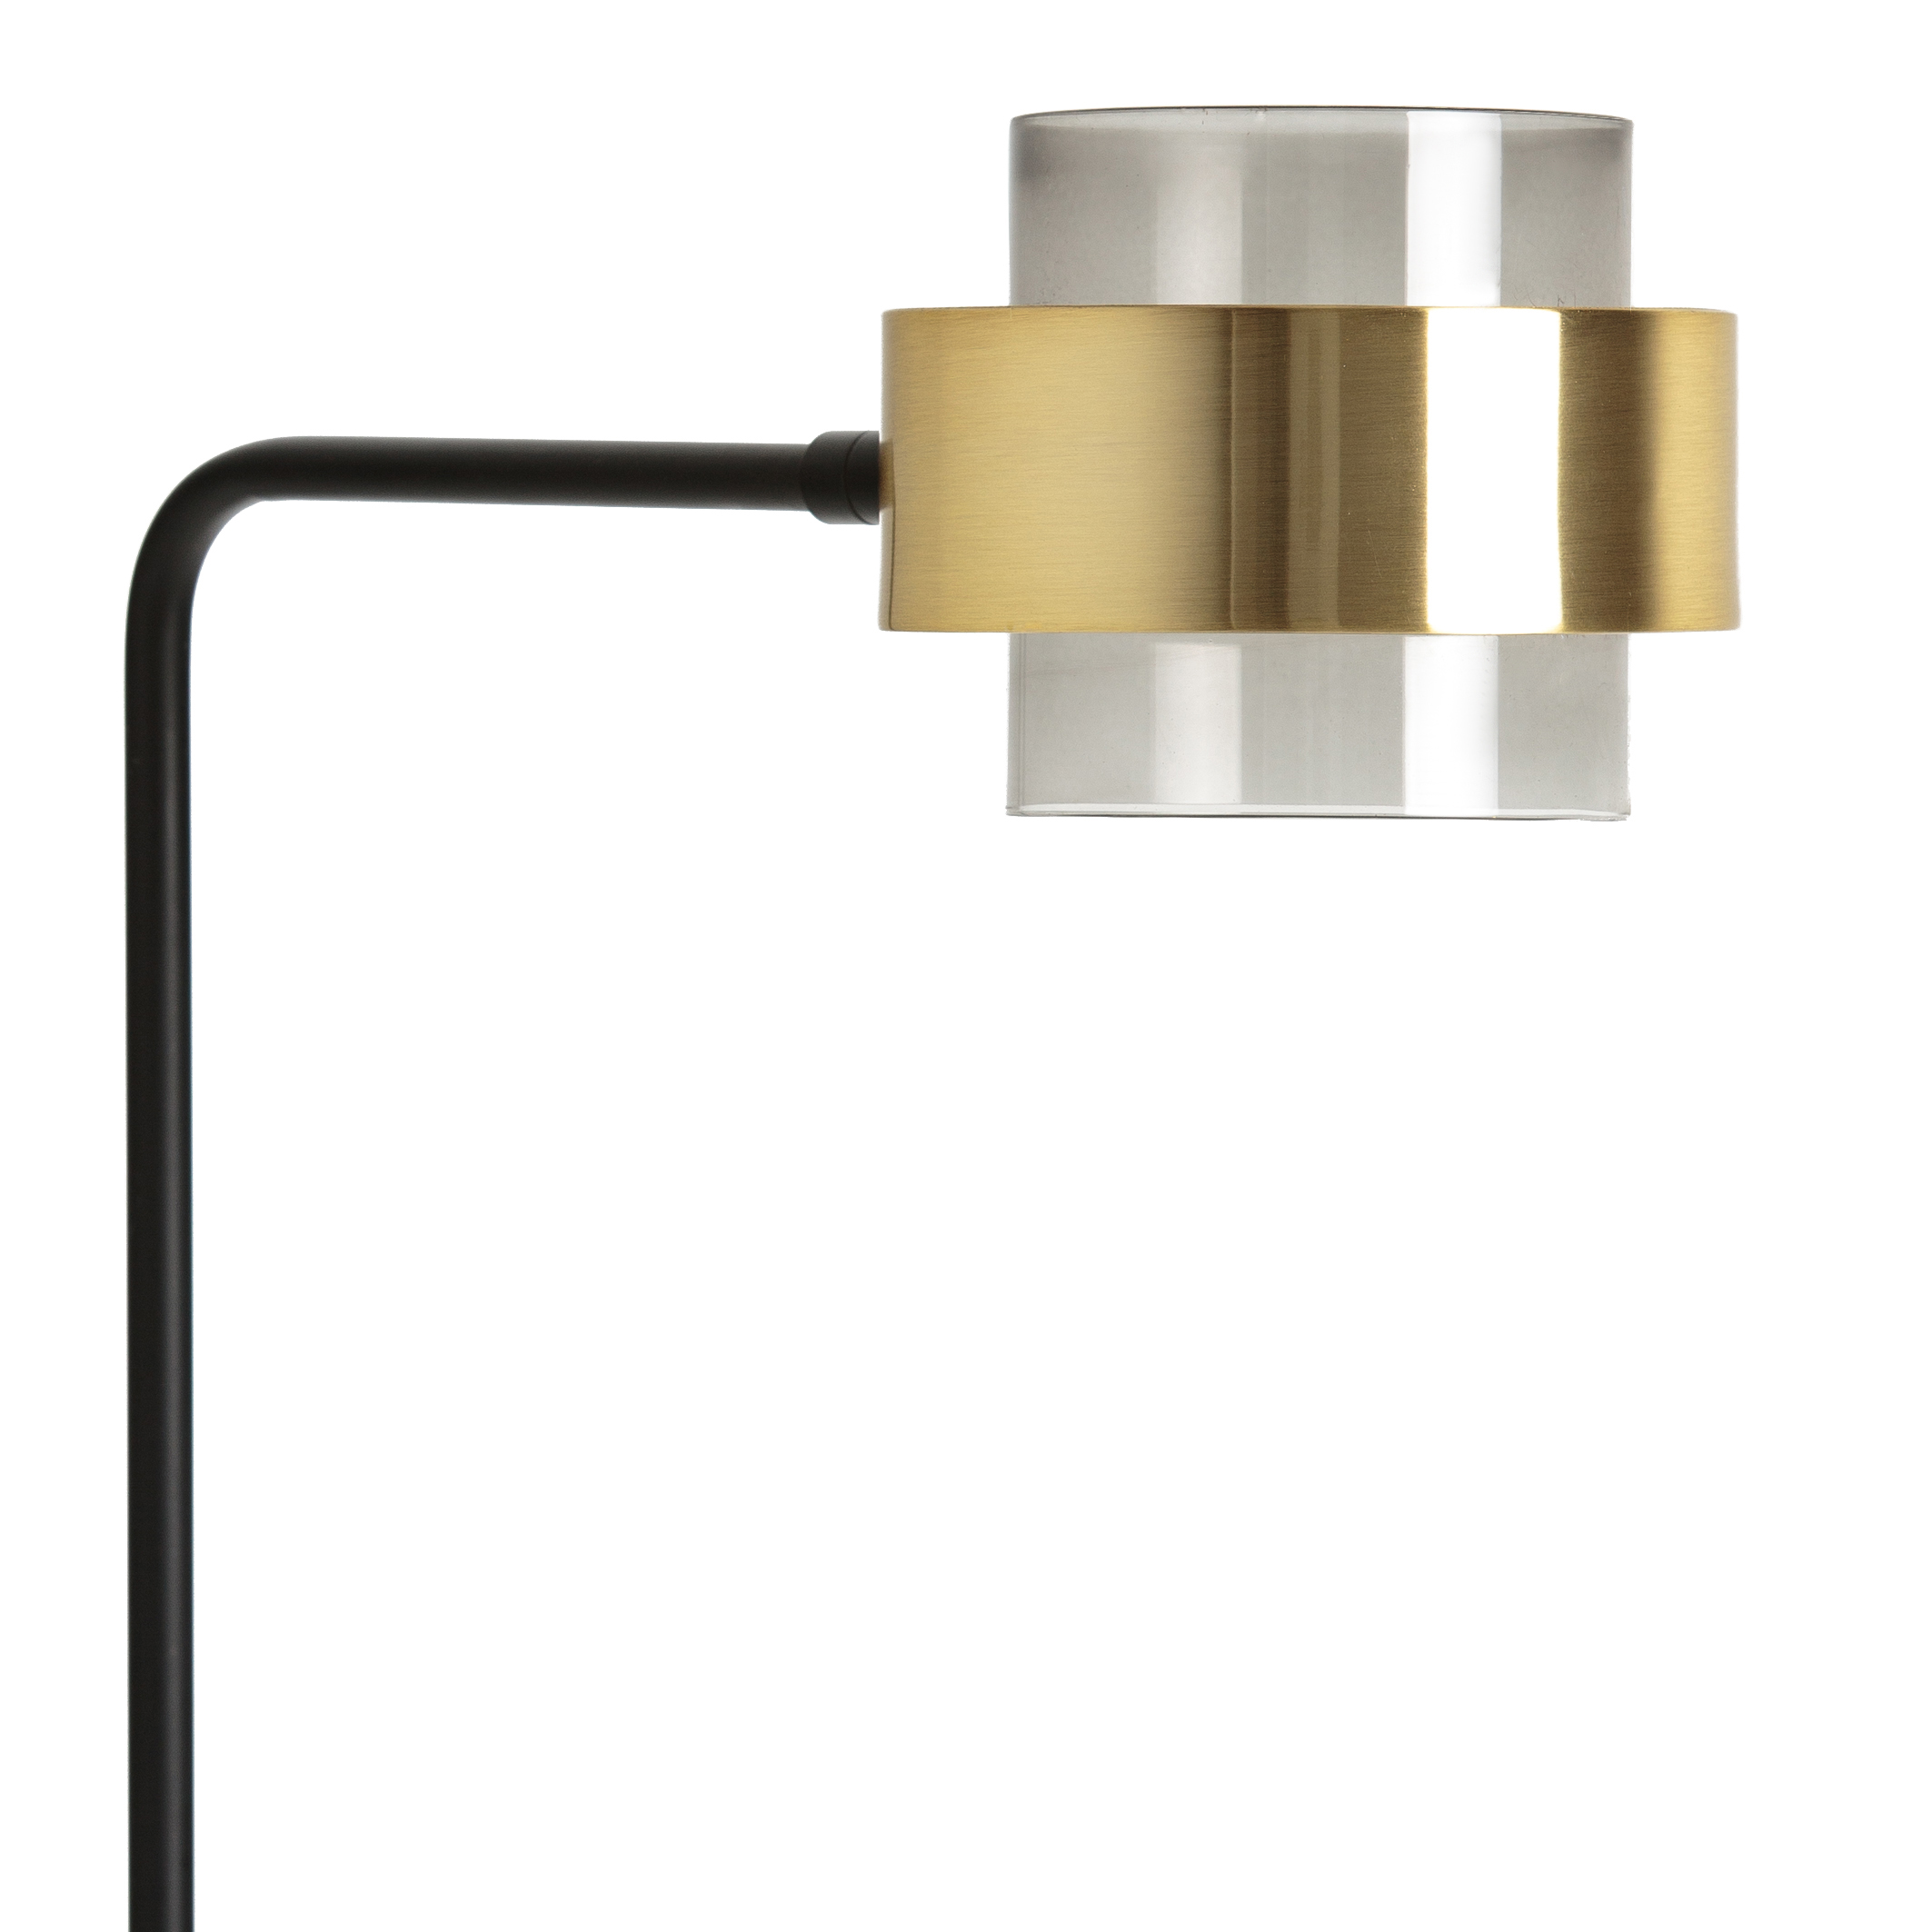 Botello metal & glass reading Redoute Interieurs floor arms La with lamp Redoute adjustable black/brass La 